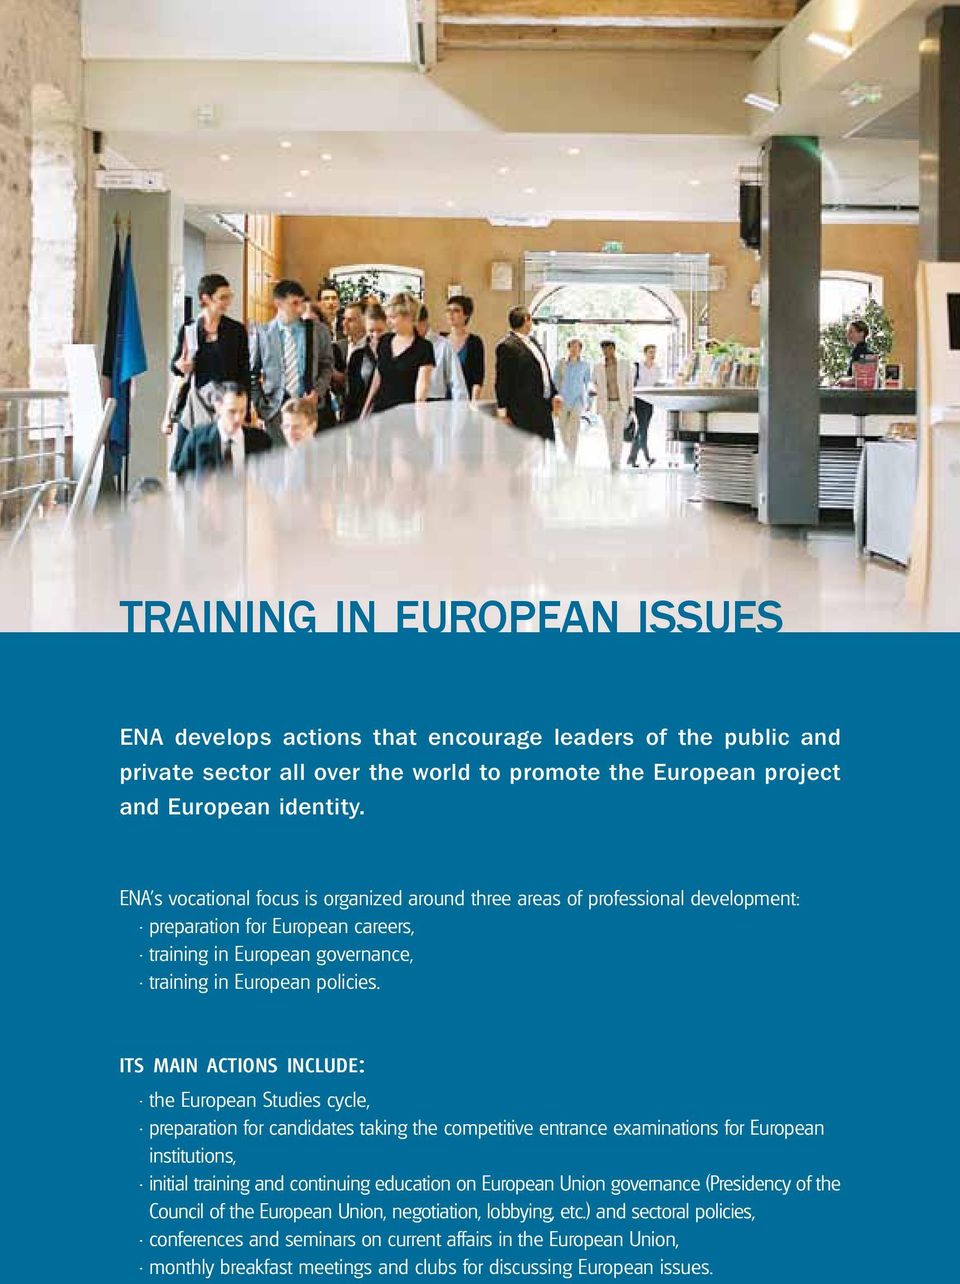 its main actions include: the European Studies cycle, preparation for candidates taking the competitive entrance examinations for European institutions, initial training and continuing education on